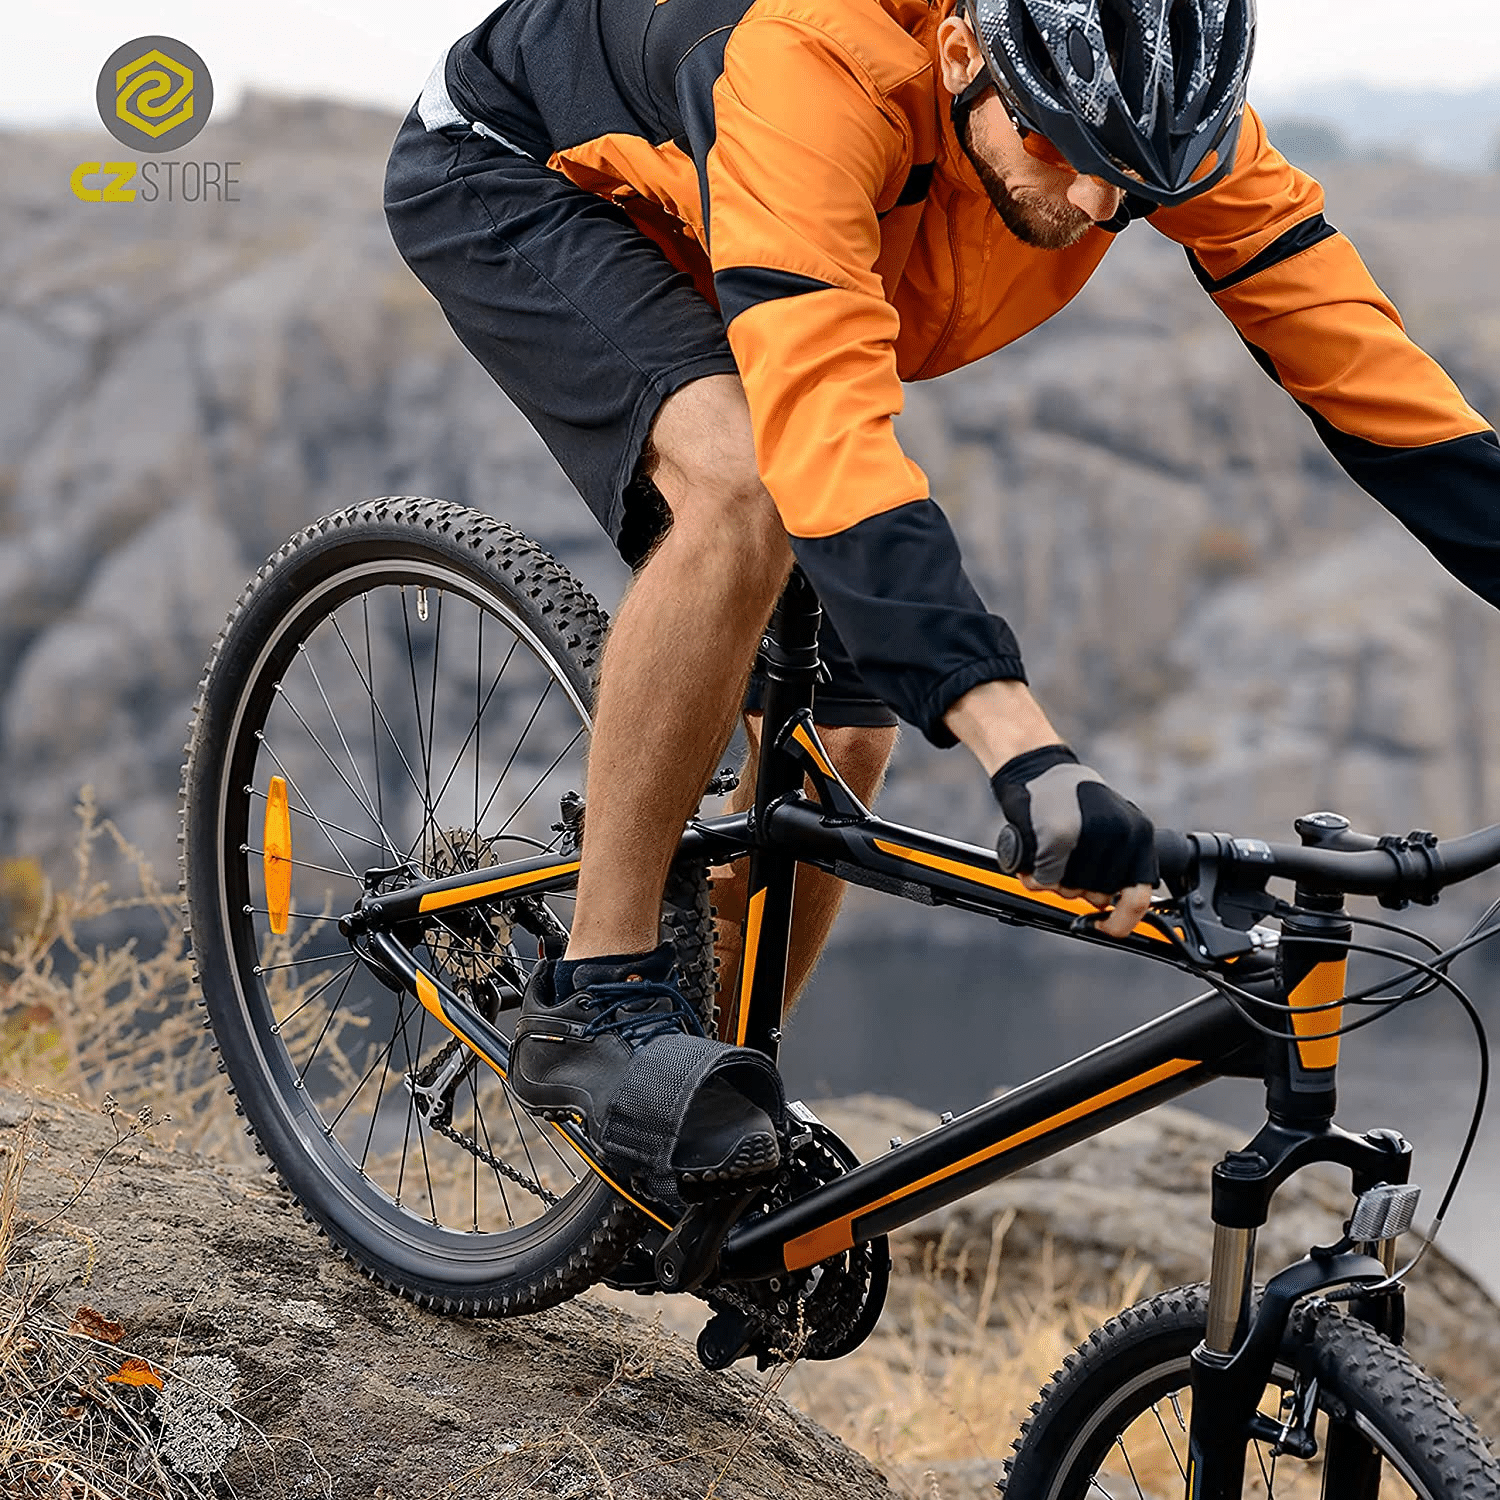 Cycling with pedal straps is good for helping you to keep control of your bike on rocky terrain.